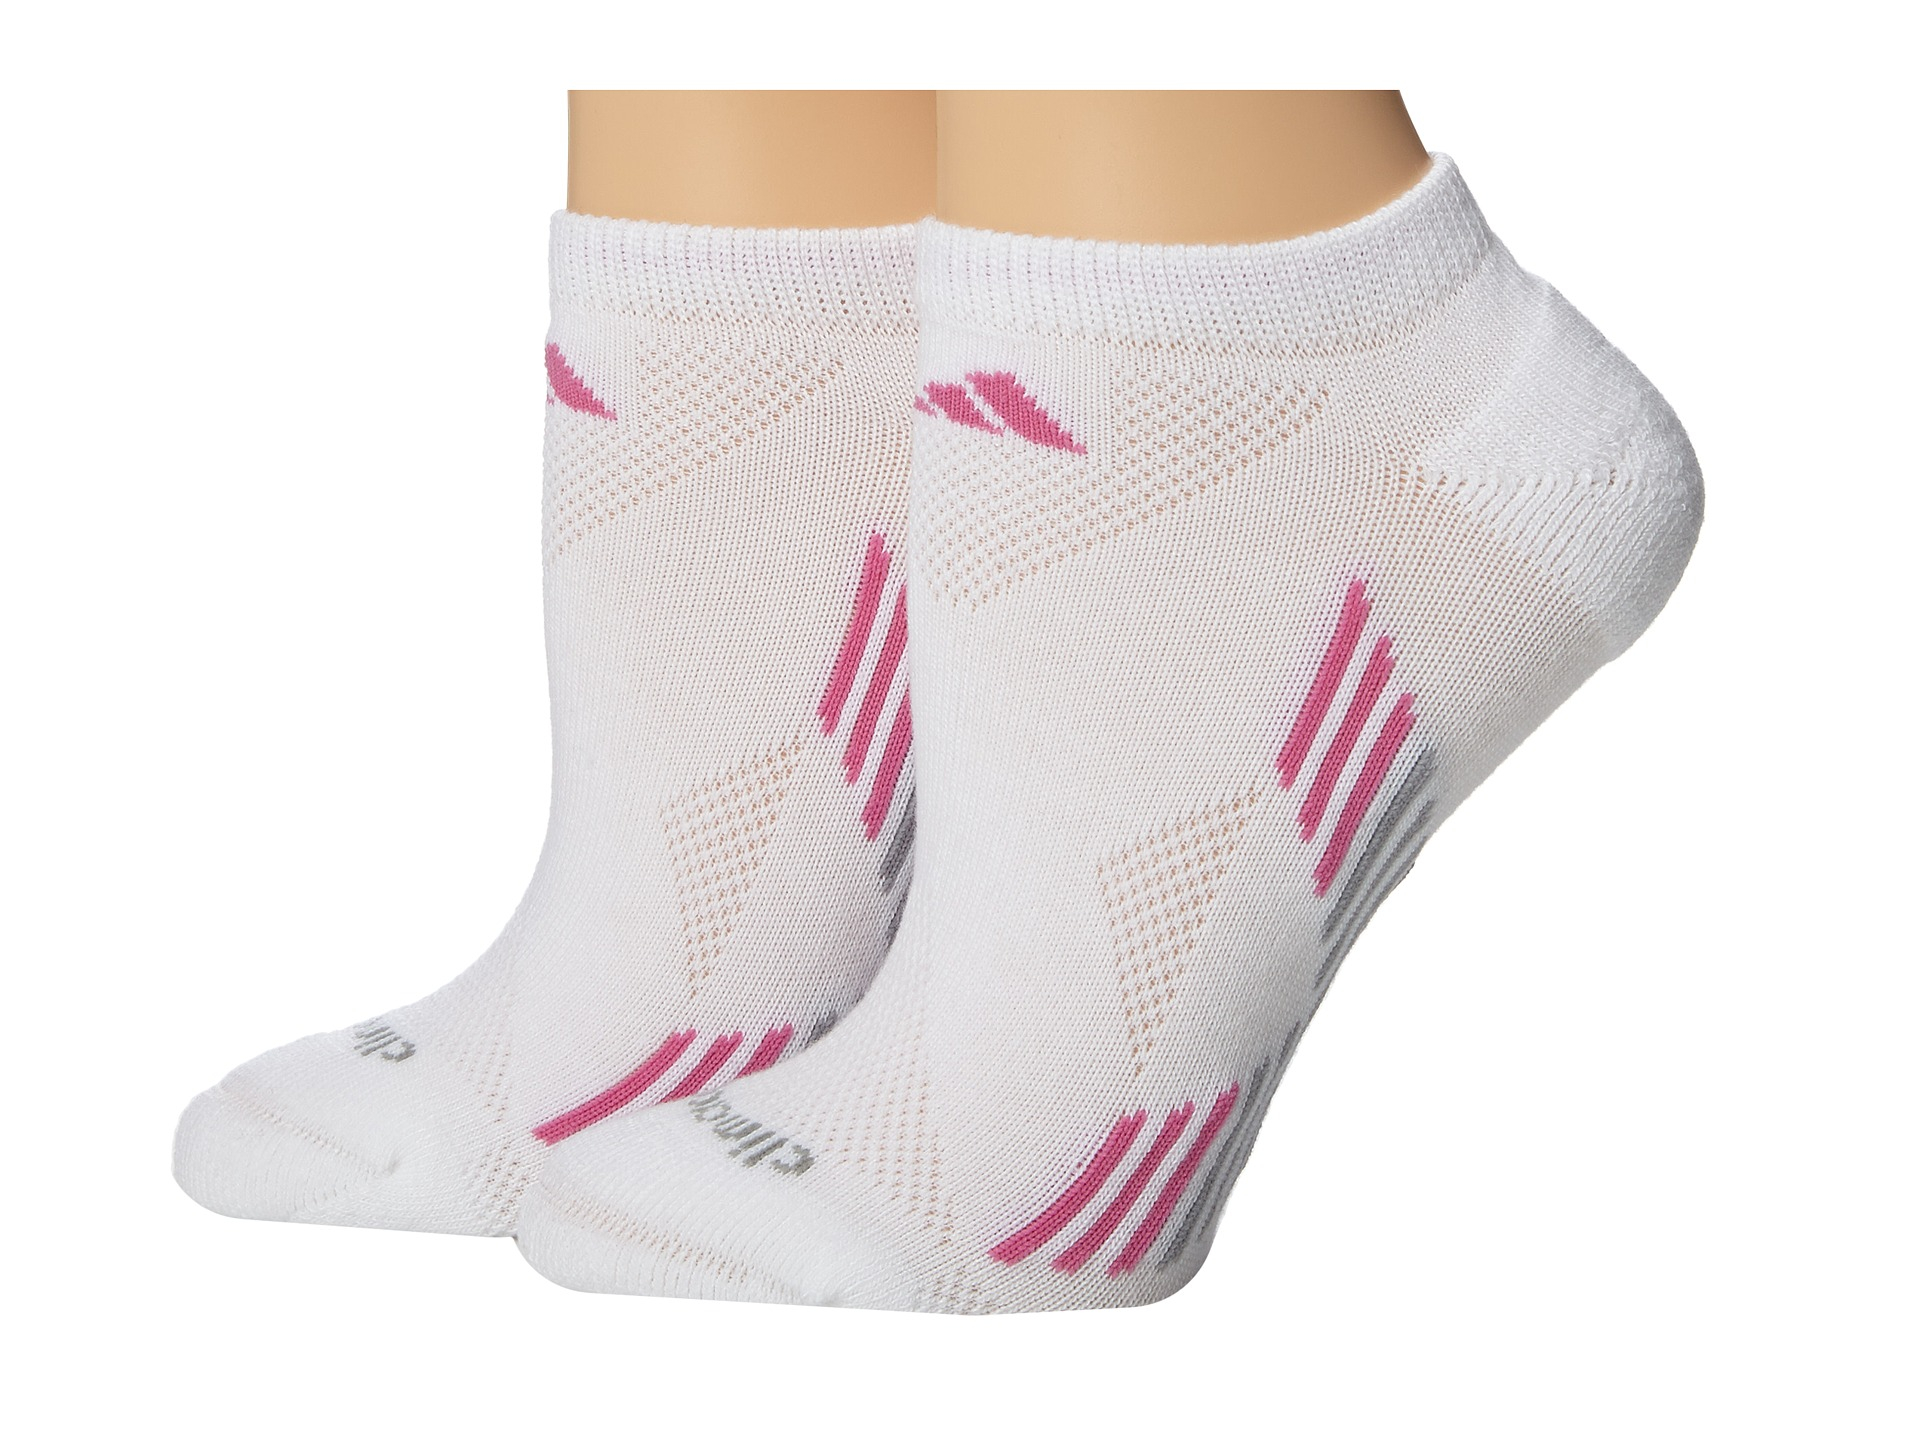 Adidas Womens Climacool X Ii 2pack Low Cut Socks in White | Lyst